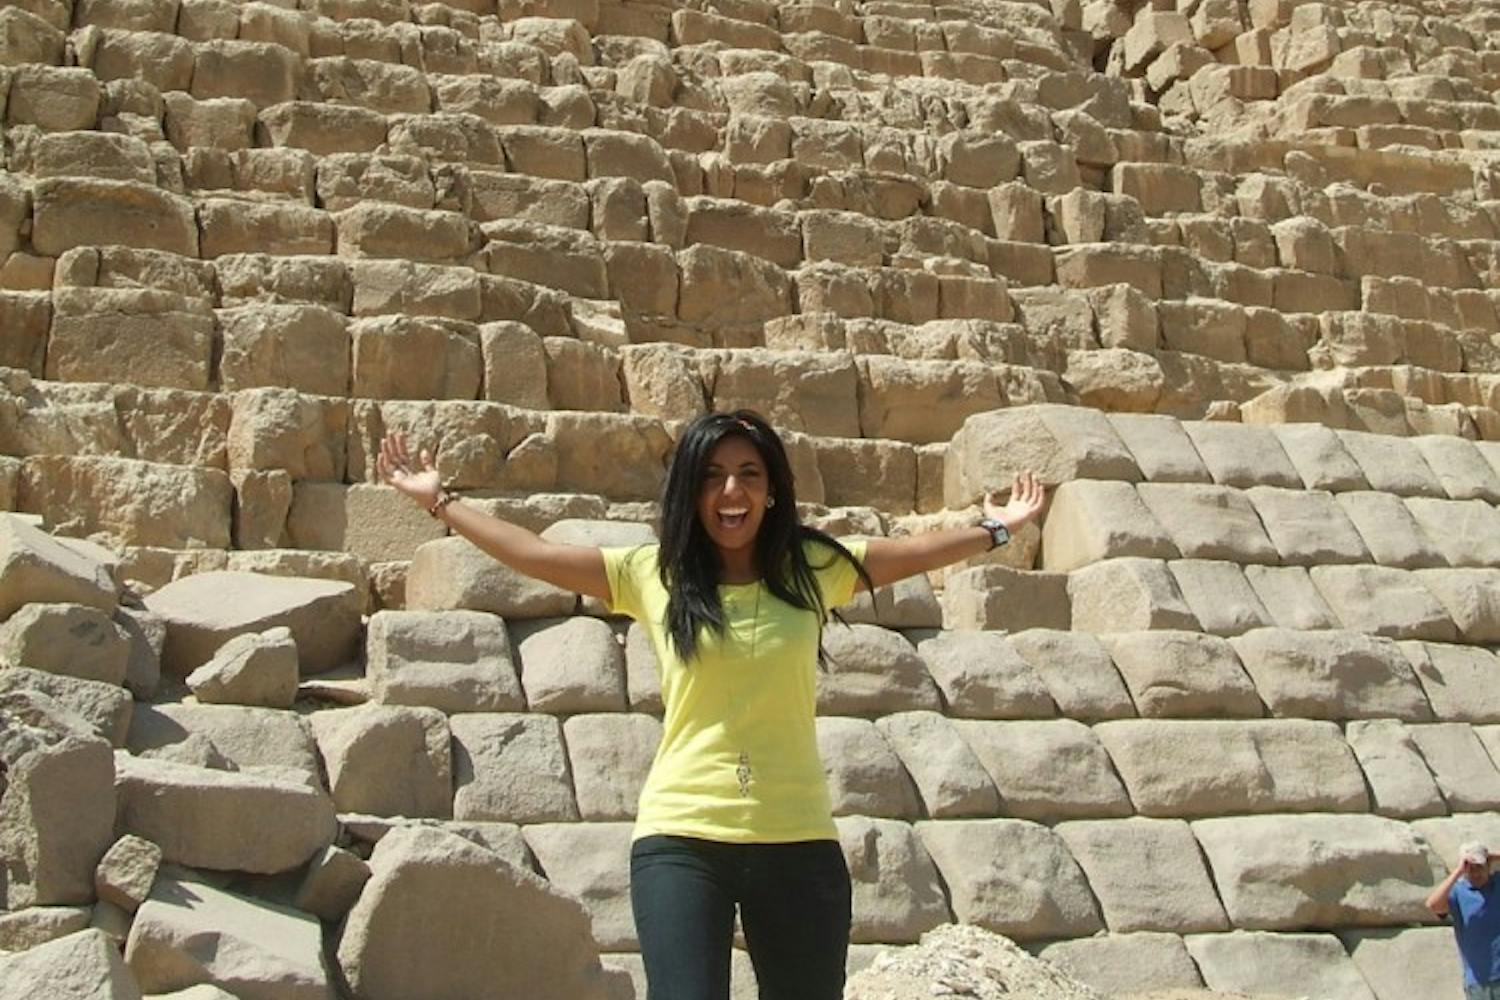 Business sustainability sophomore Diana Asaad during a recent trip to Egypt. Photo courtesy Diana Asaad.